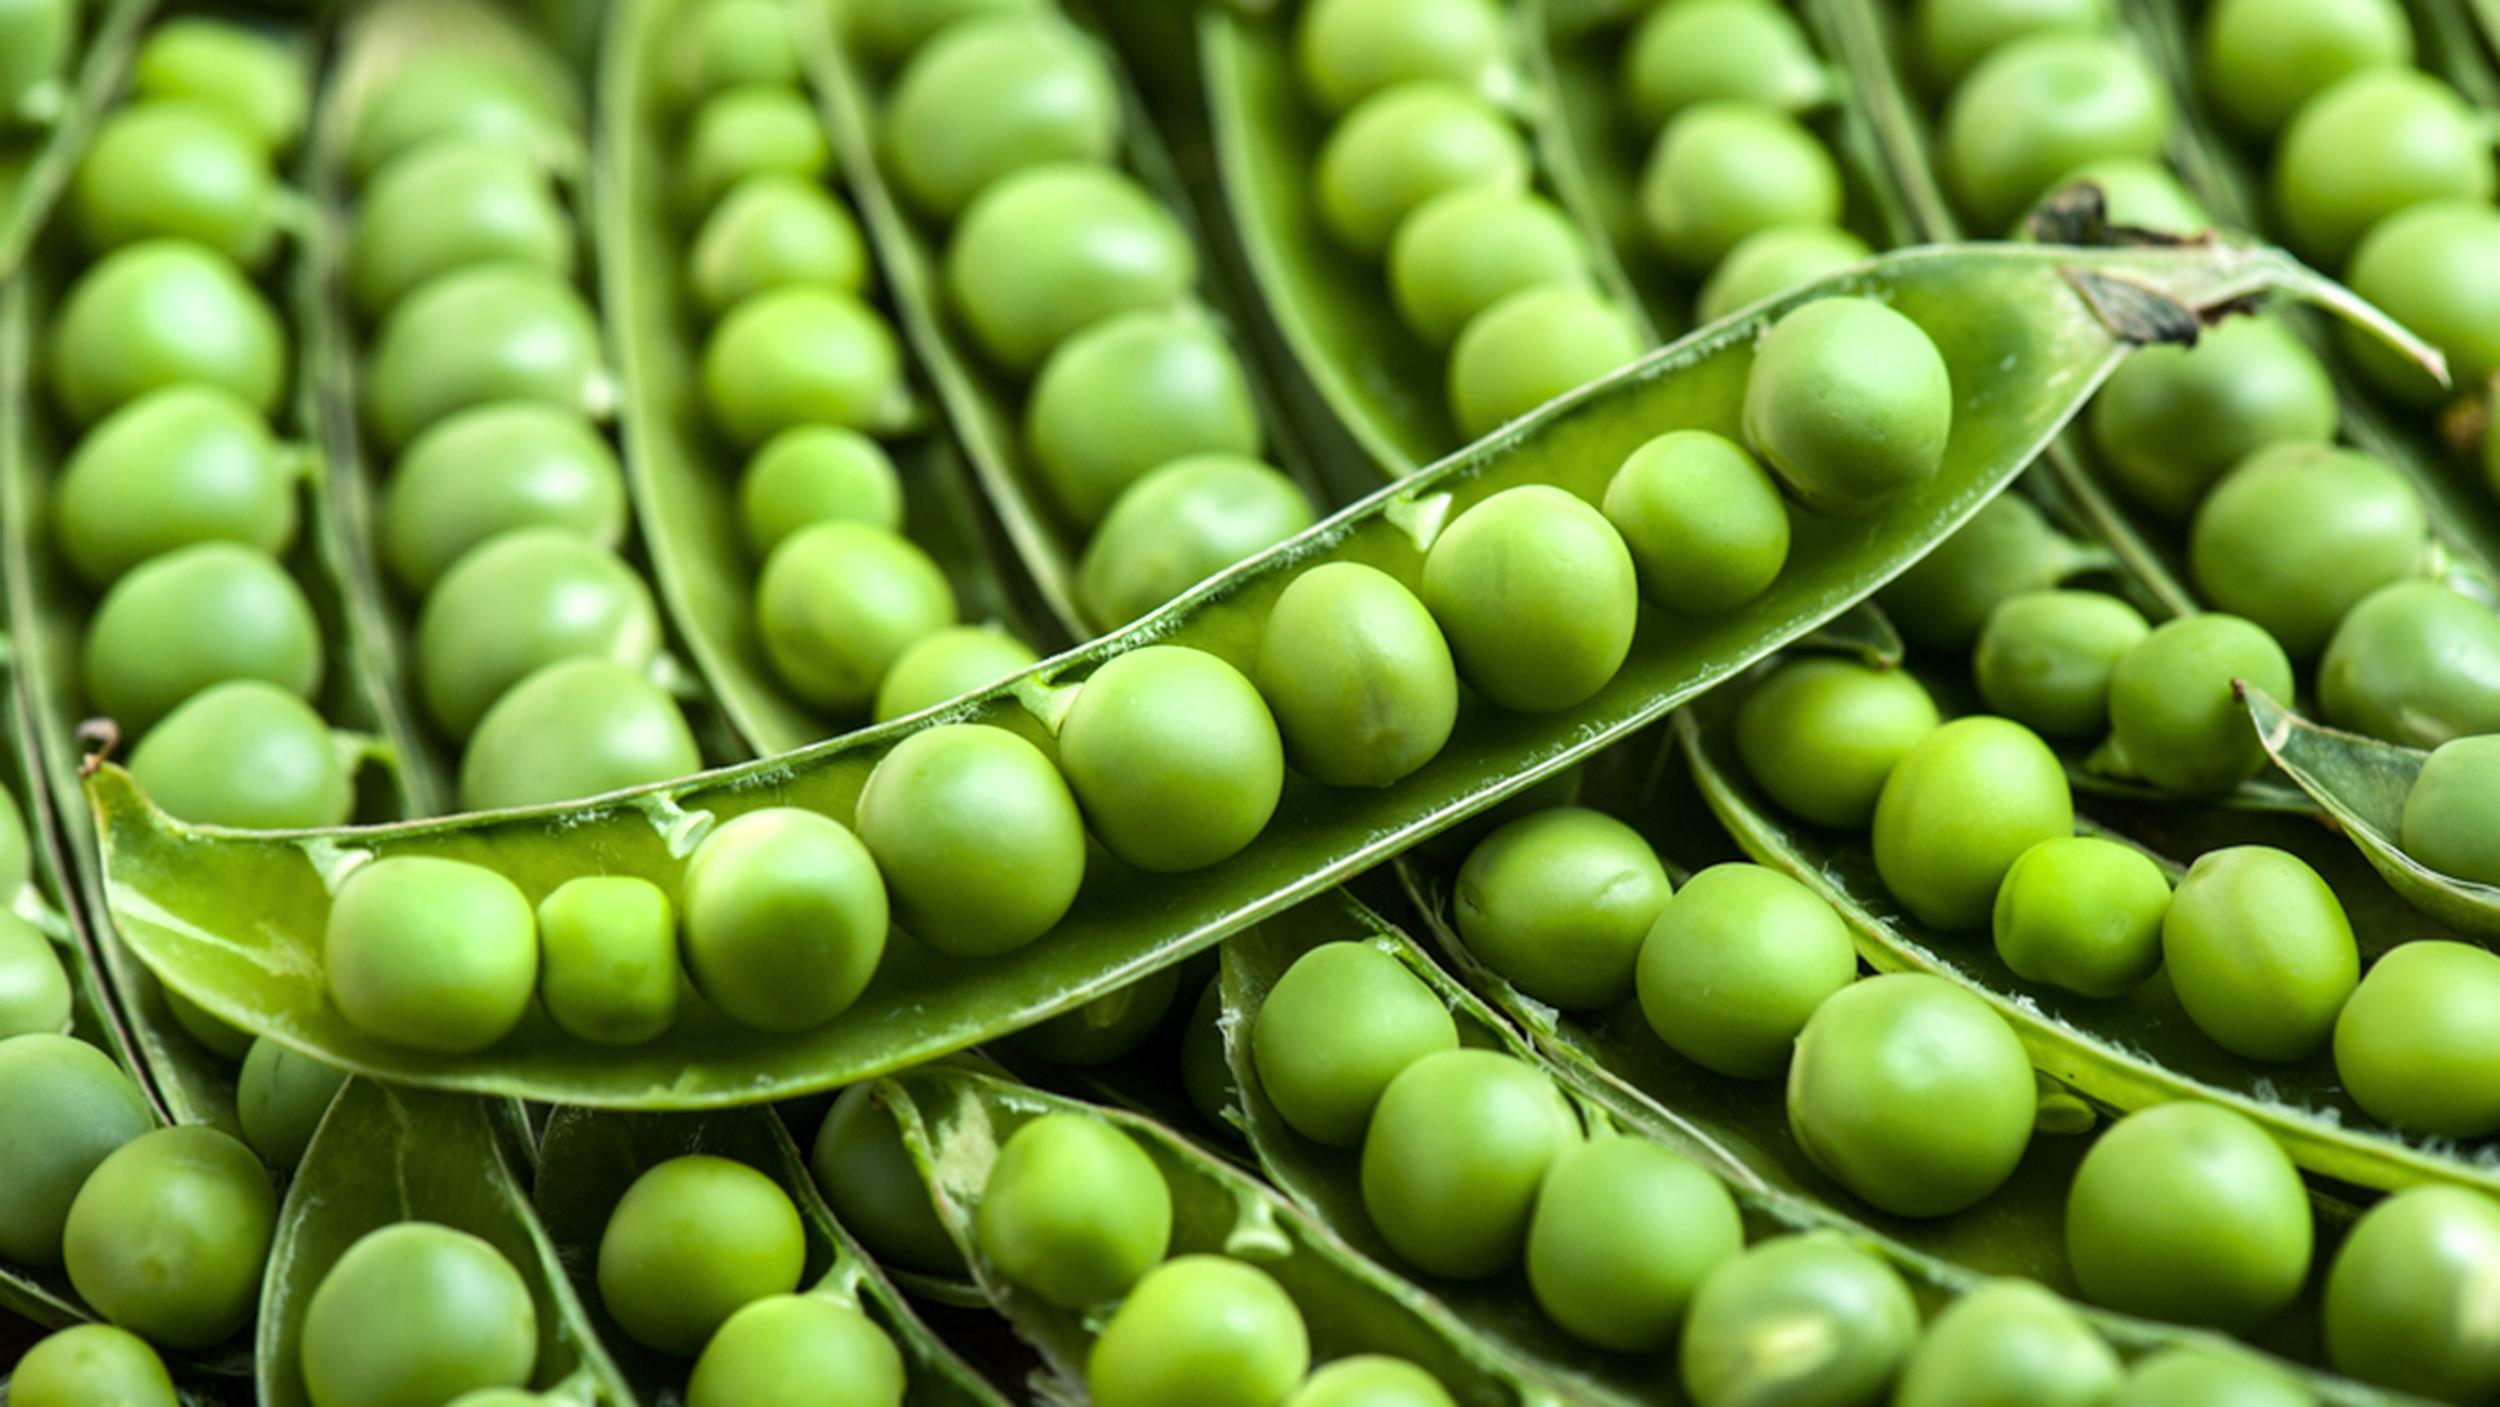 Pea protein: Is it the new soy?